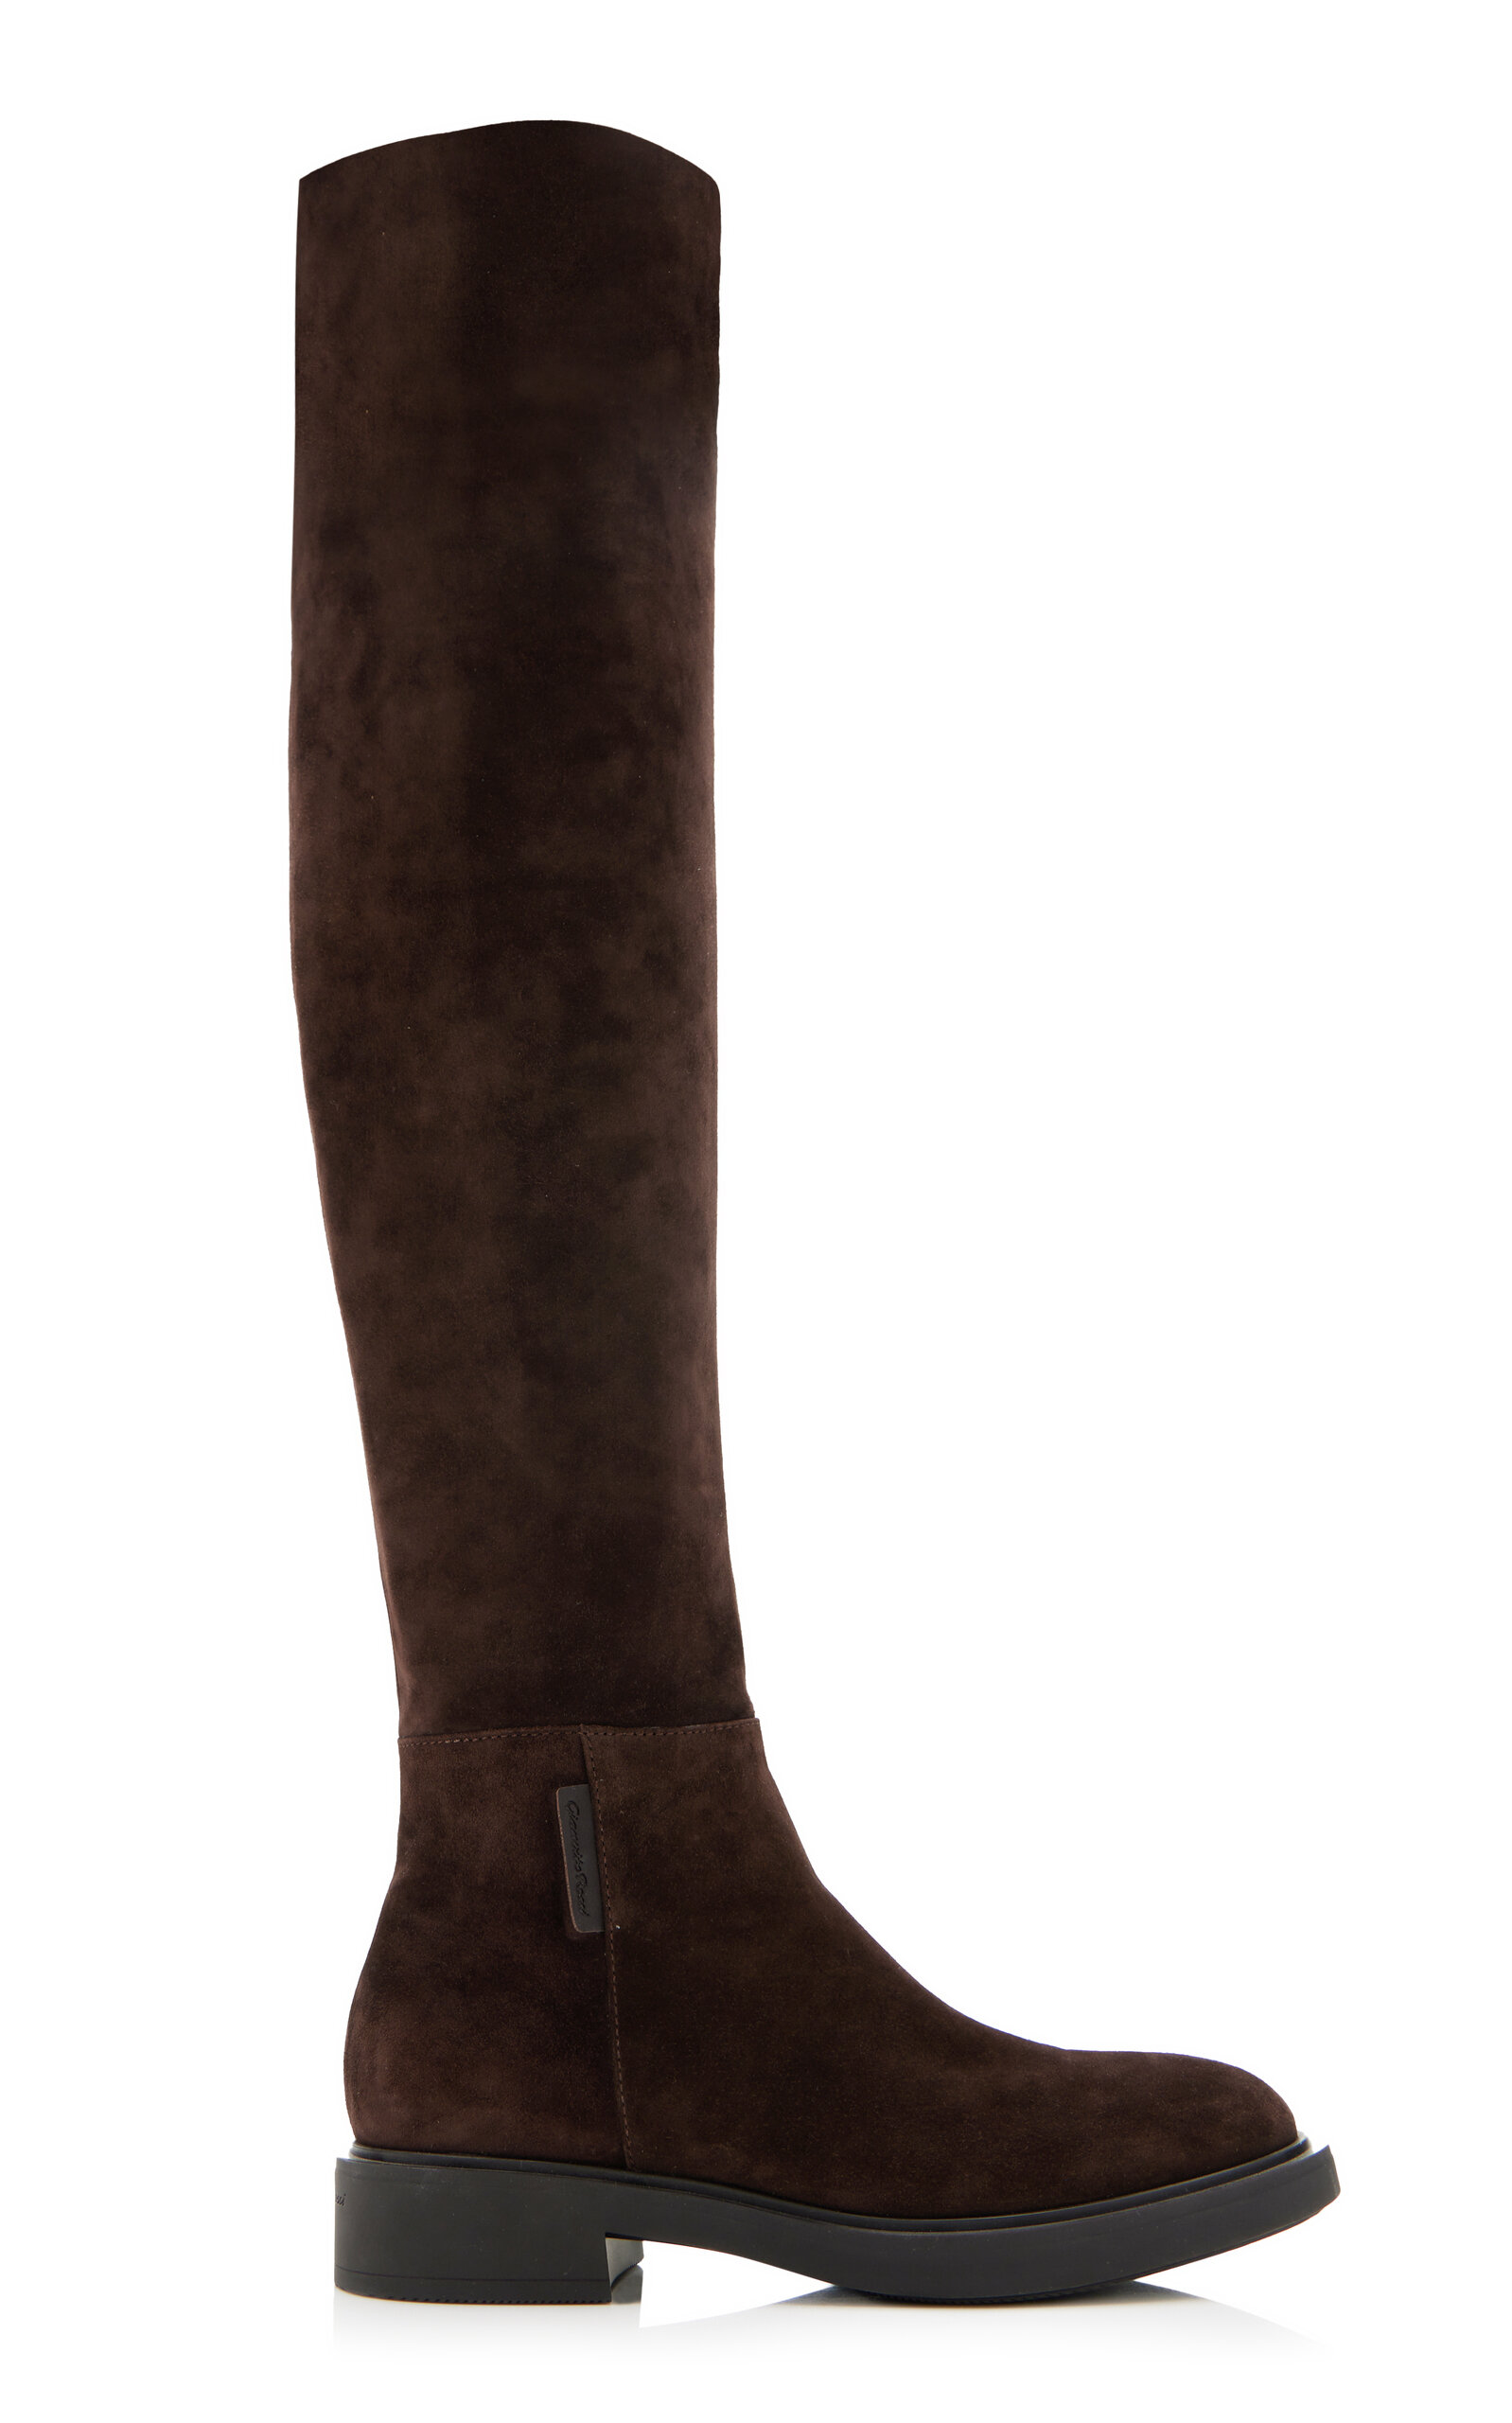 Lexington Suede Over-The-Knee Boots